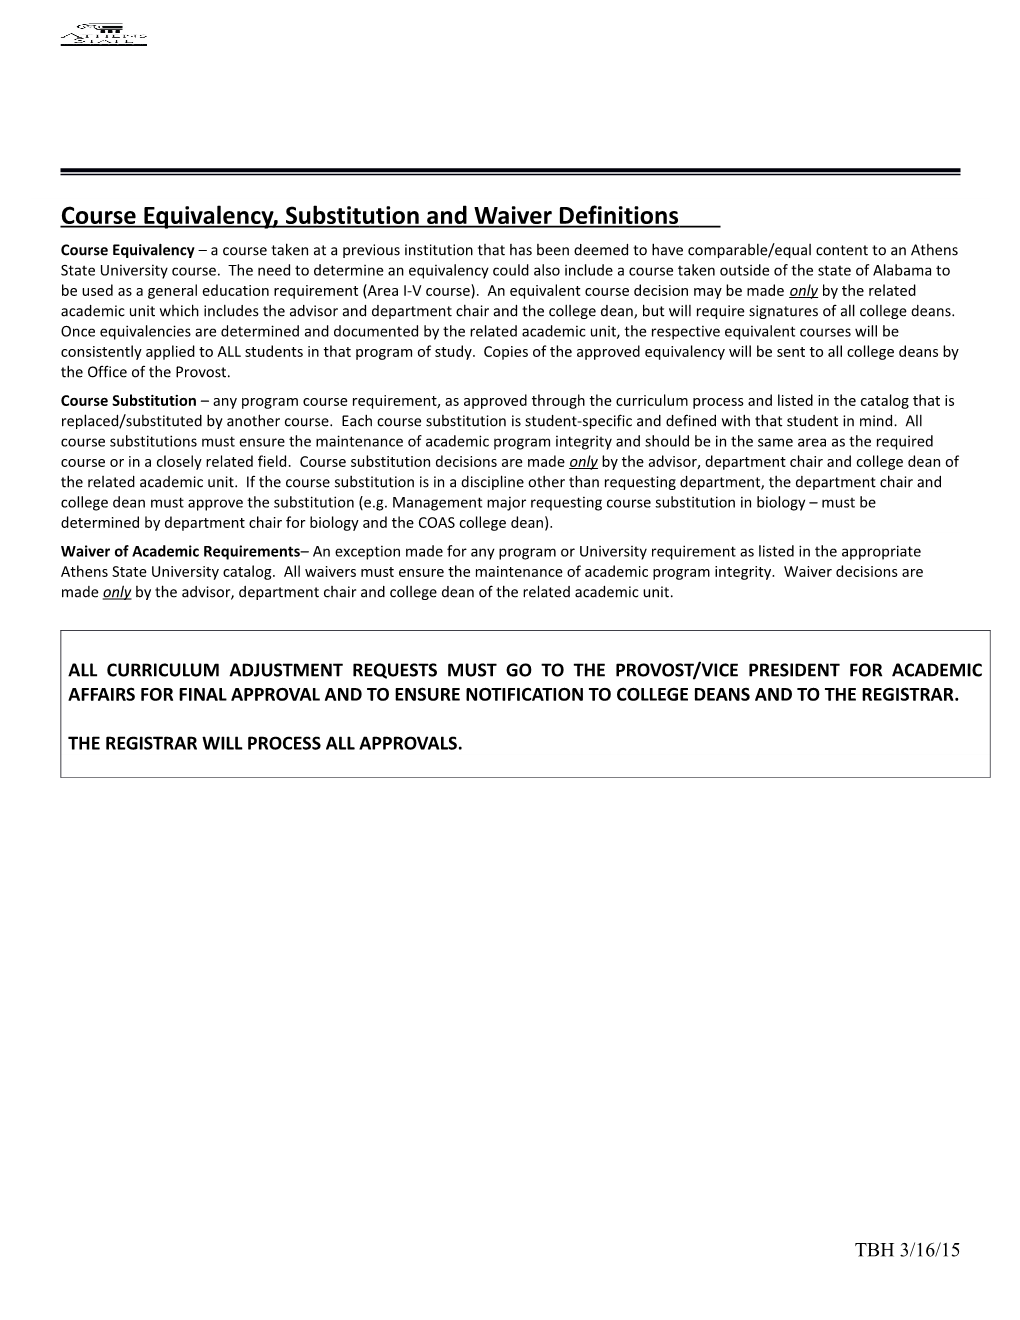 Course Equivalency, Substitution and Waiver Definitions